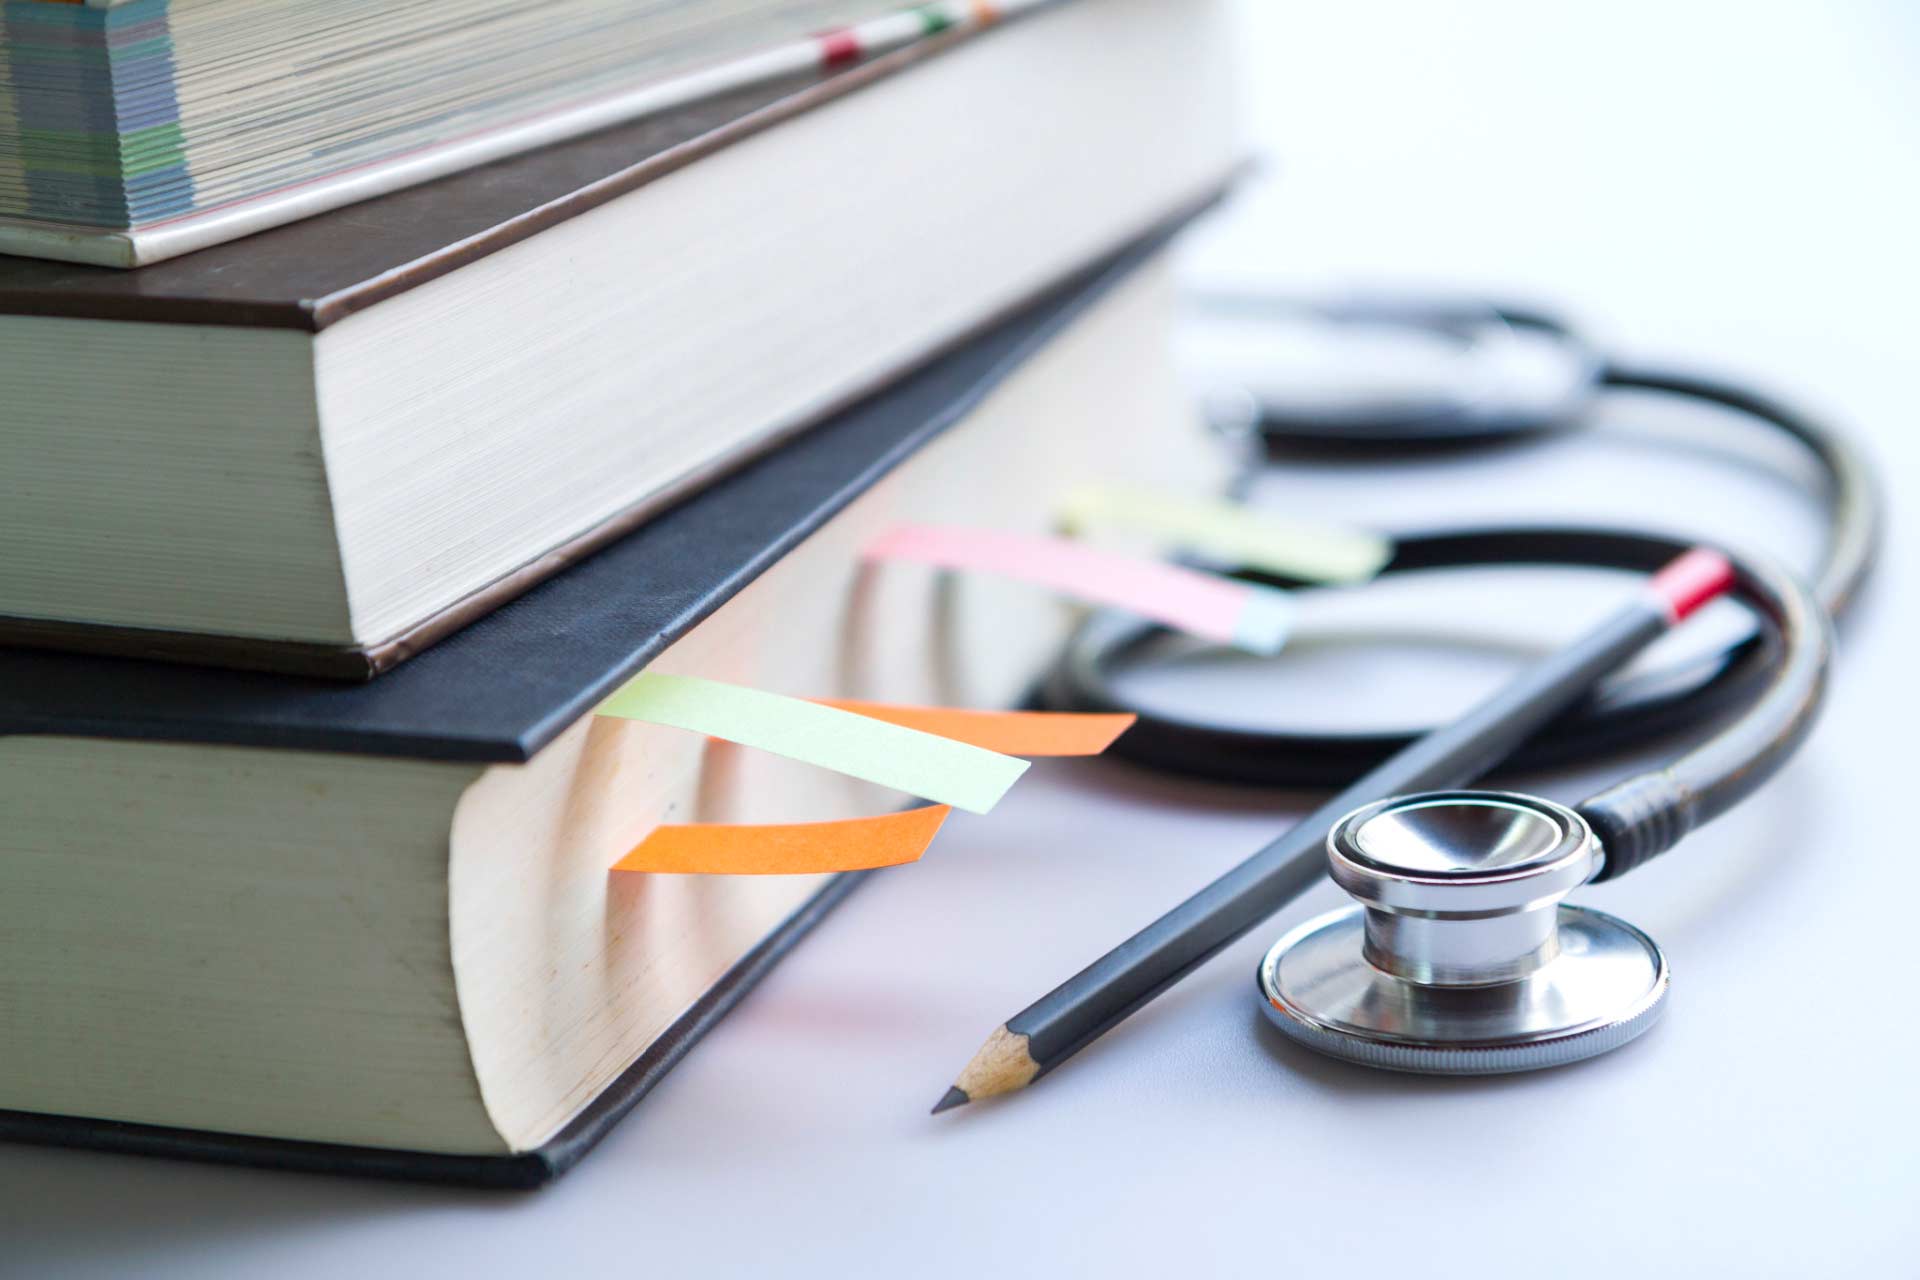 Stethoscope, pencil, and stack of medical textbooks on desk, representing cannabis nurse education